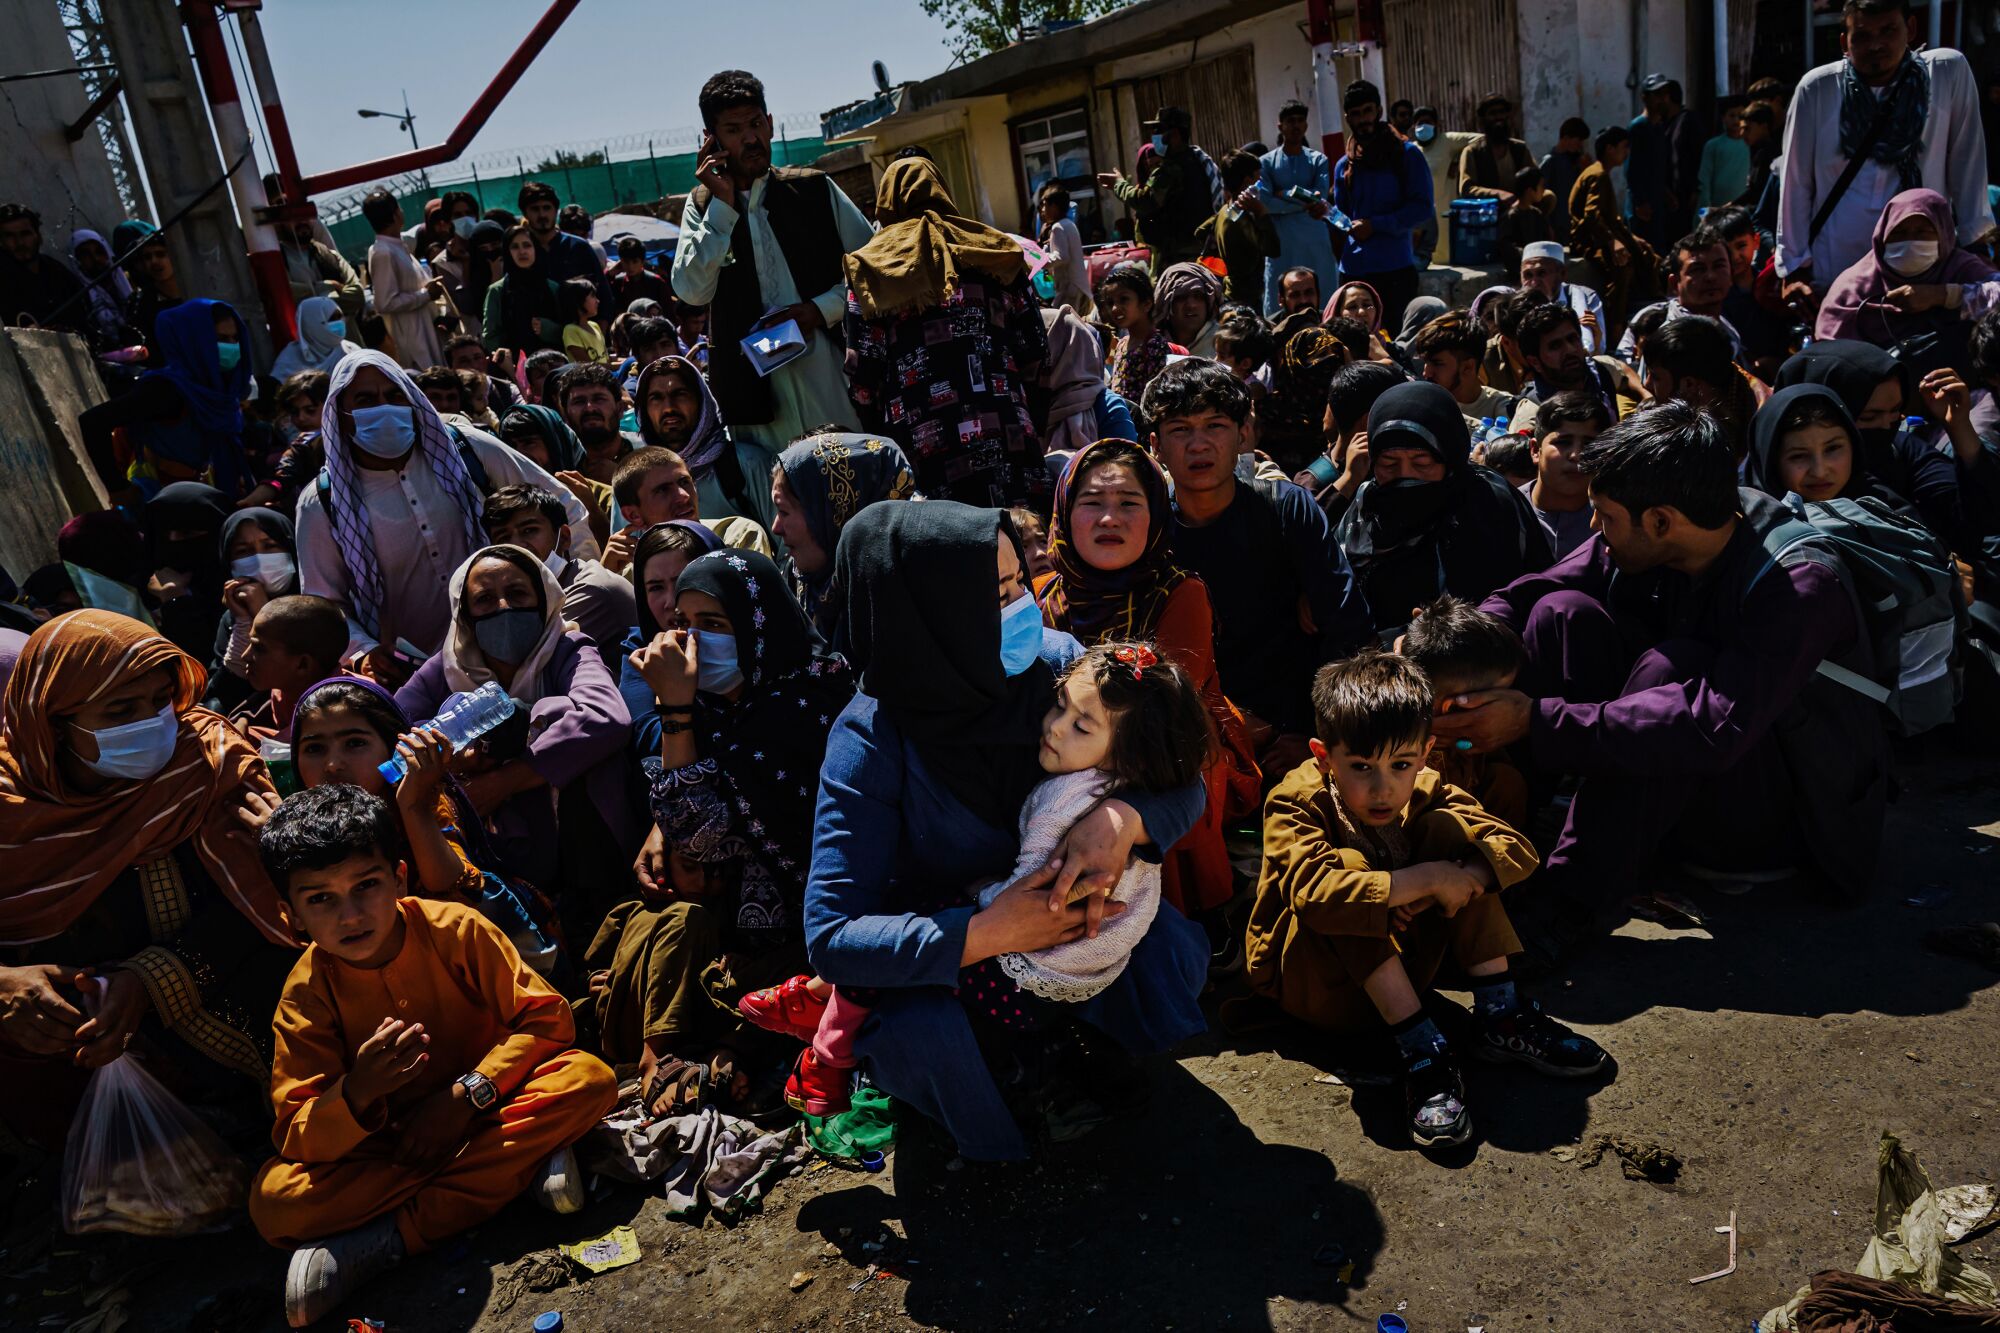 Women and children crouch in the sweltering heat at a Taliban-controlled checkpoint near Abbey Gate